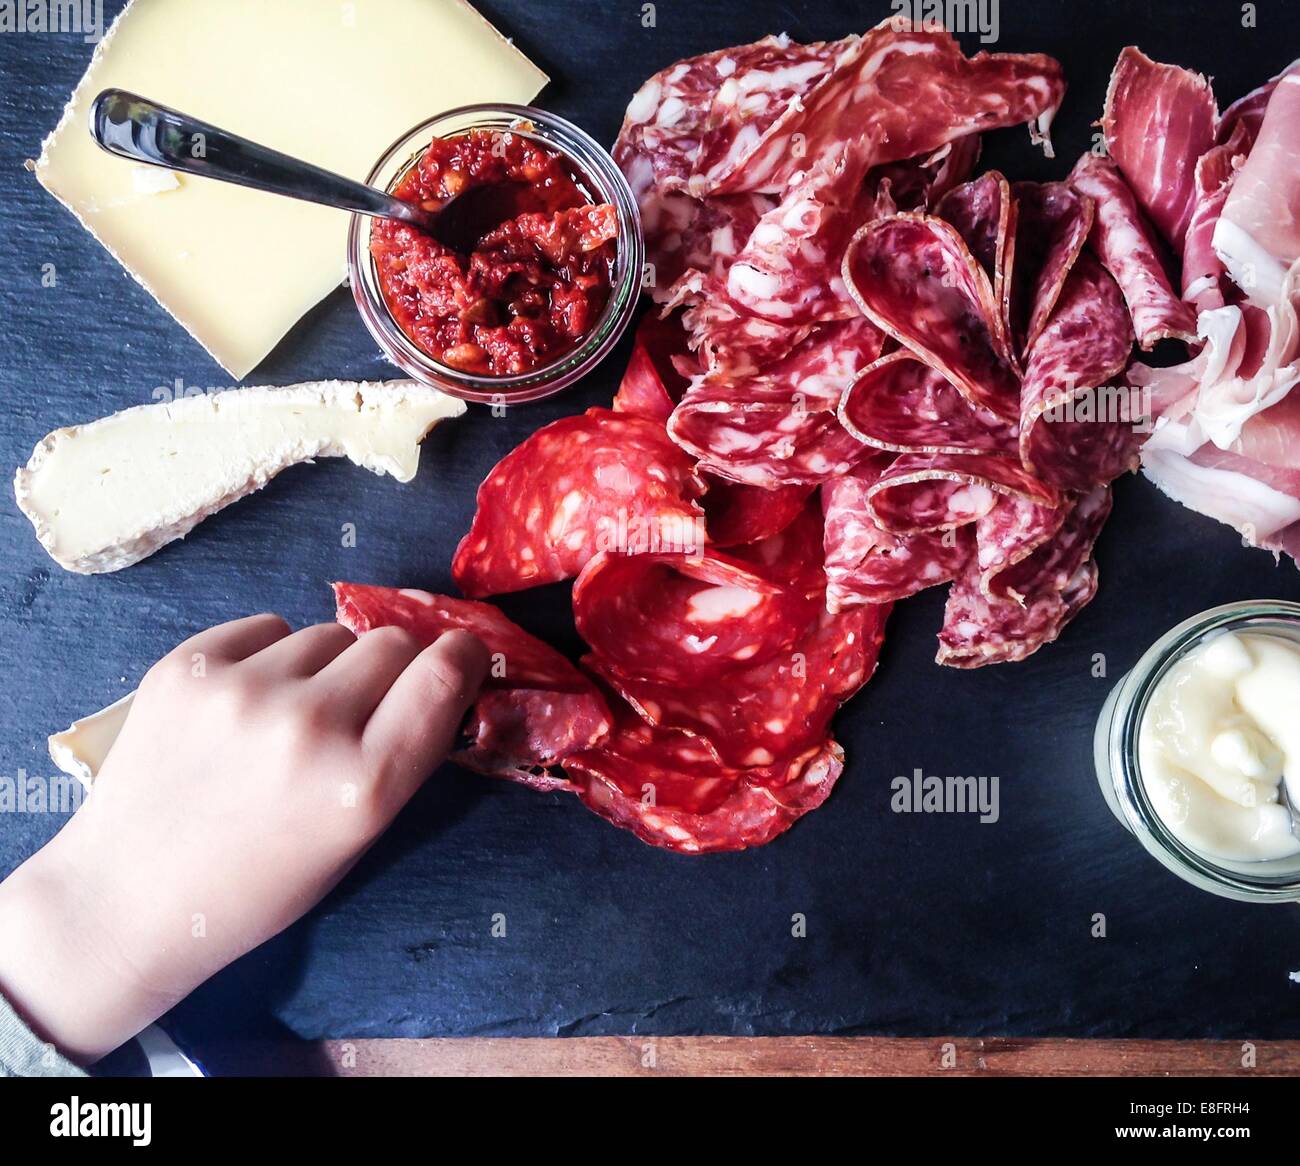 Human hand reaching for charcuterie and cheese board Stock Photo